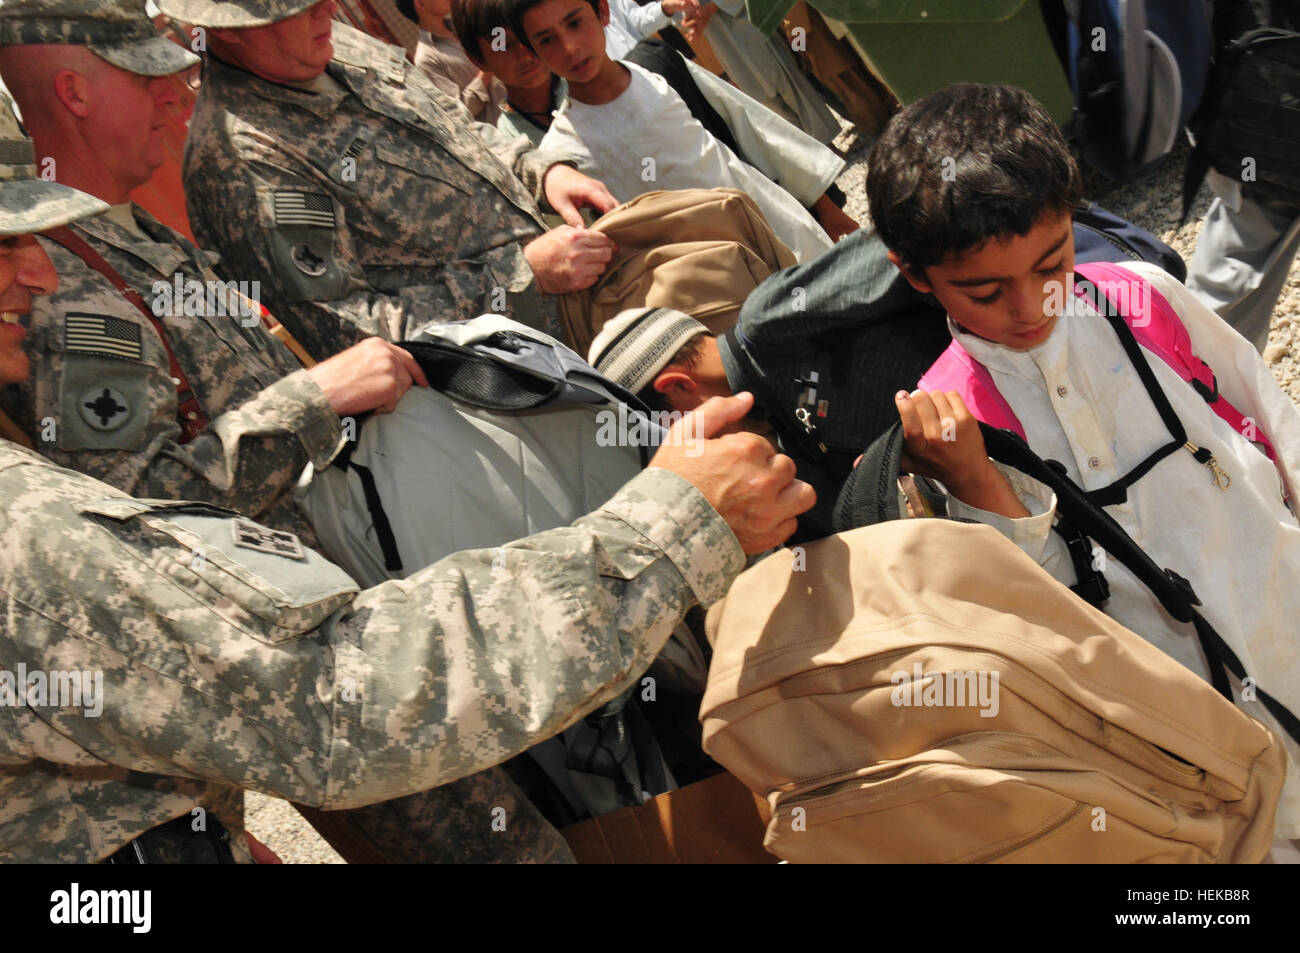 A local Afghan boy receives a backpack filled with school supplies from U.S. Army Lt. Col. Antonio Sanabria, 101st Sustainment Brigade liaison officer assigned to Joint Sustainment Command-Afghanistan, at the Kandahar Airfield Bazaar School June 25. The school supplies were provided through a unique collaboration between Mid Gulf Forestry Inc. and students from Parklane Academy in McComb, Miss. Mississippi Army National Guard soldiers donate backpacks and school supplies to Afghan children 424606 Stock Photo